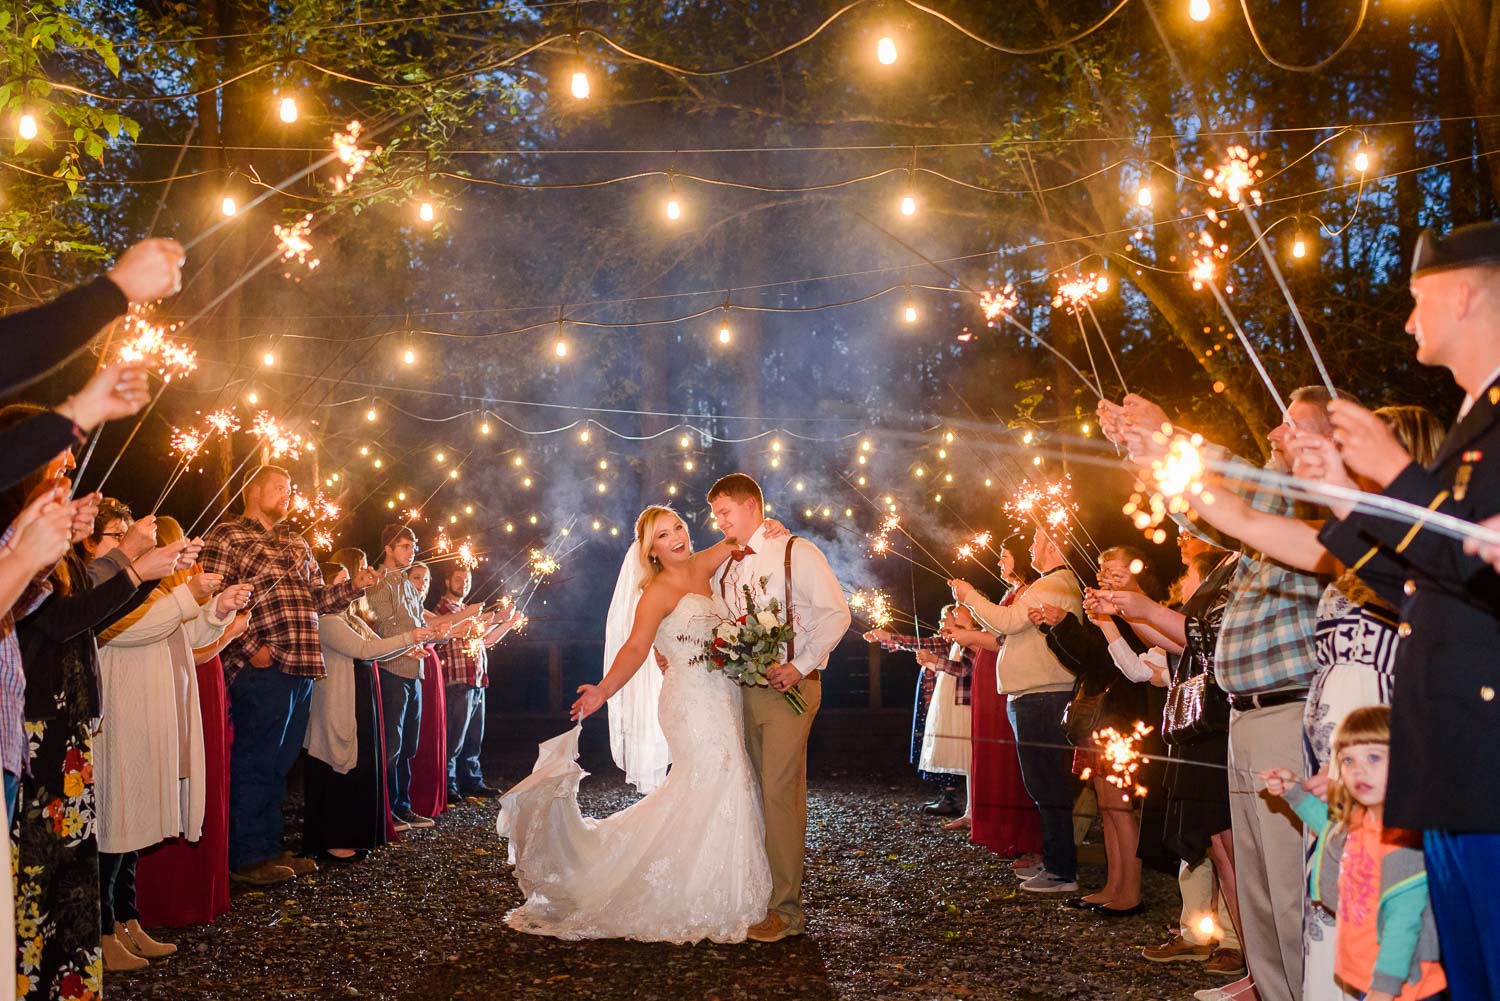 Nelya Photographer night time wedding sparkler exit under twinkly lights at Hiwassee River Weddings